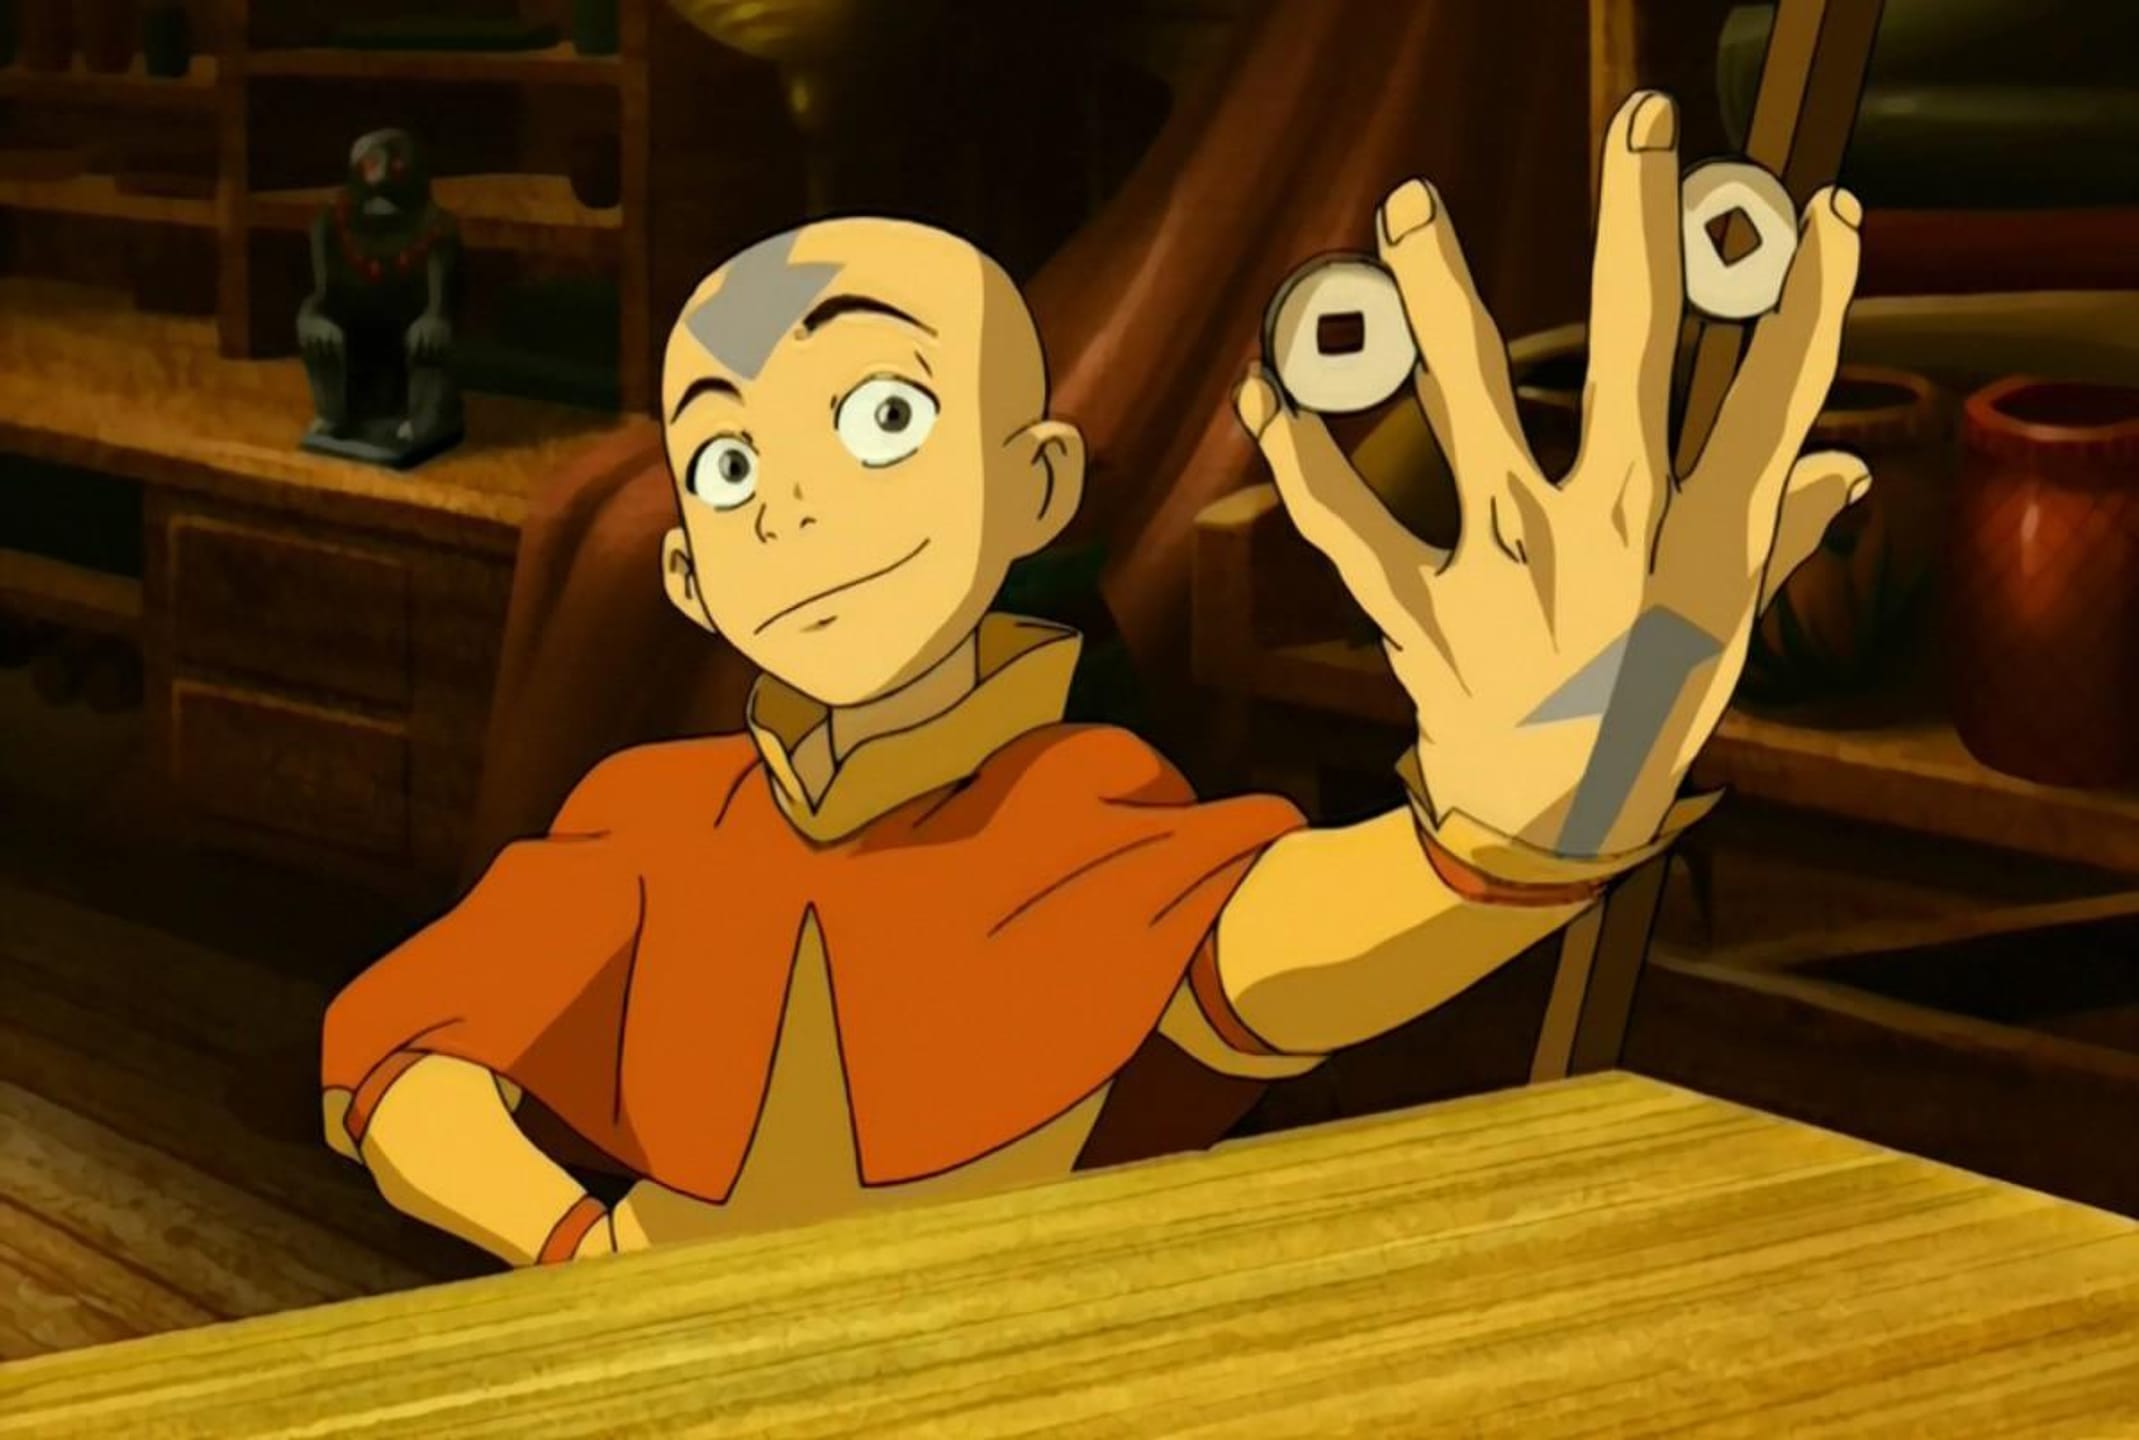 Avatar: The Last Airbender creator says he'd fix a lot about the show